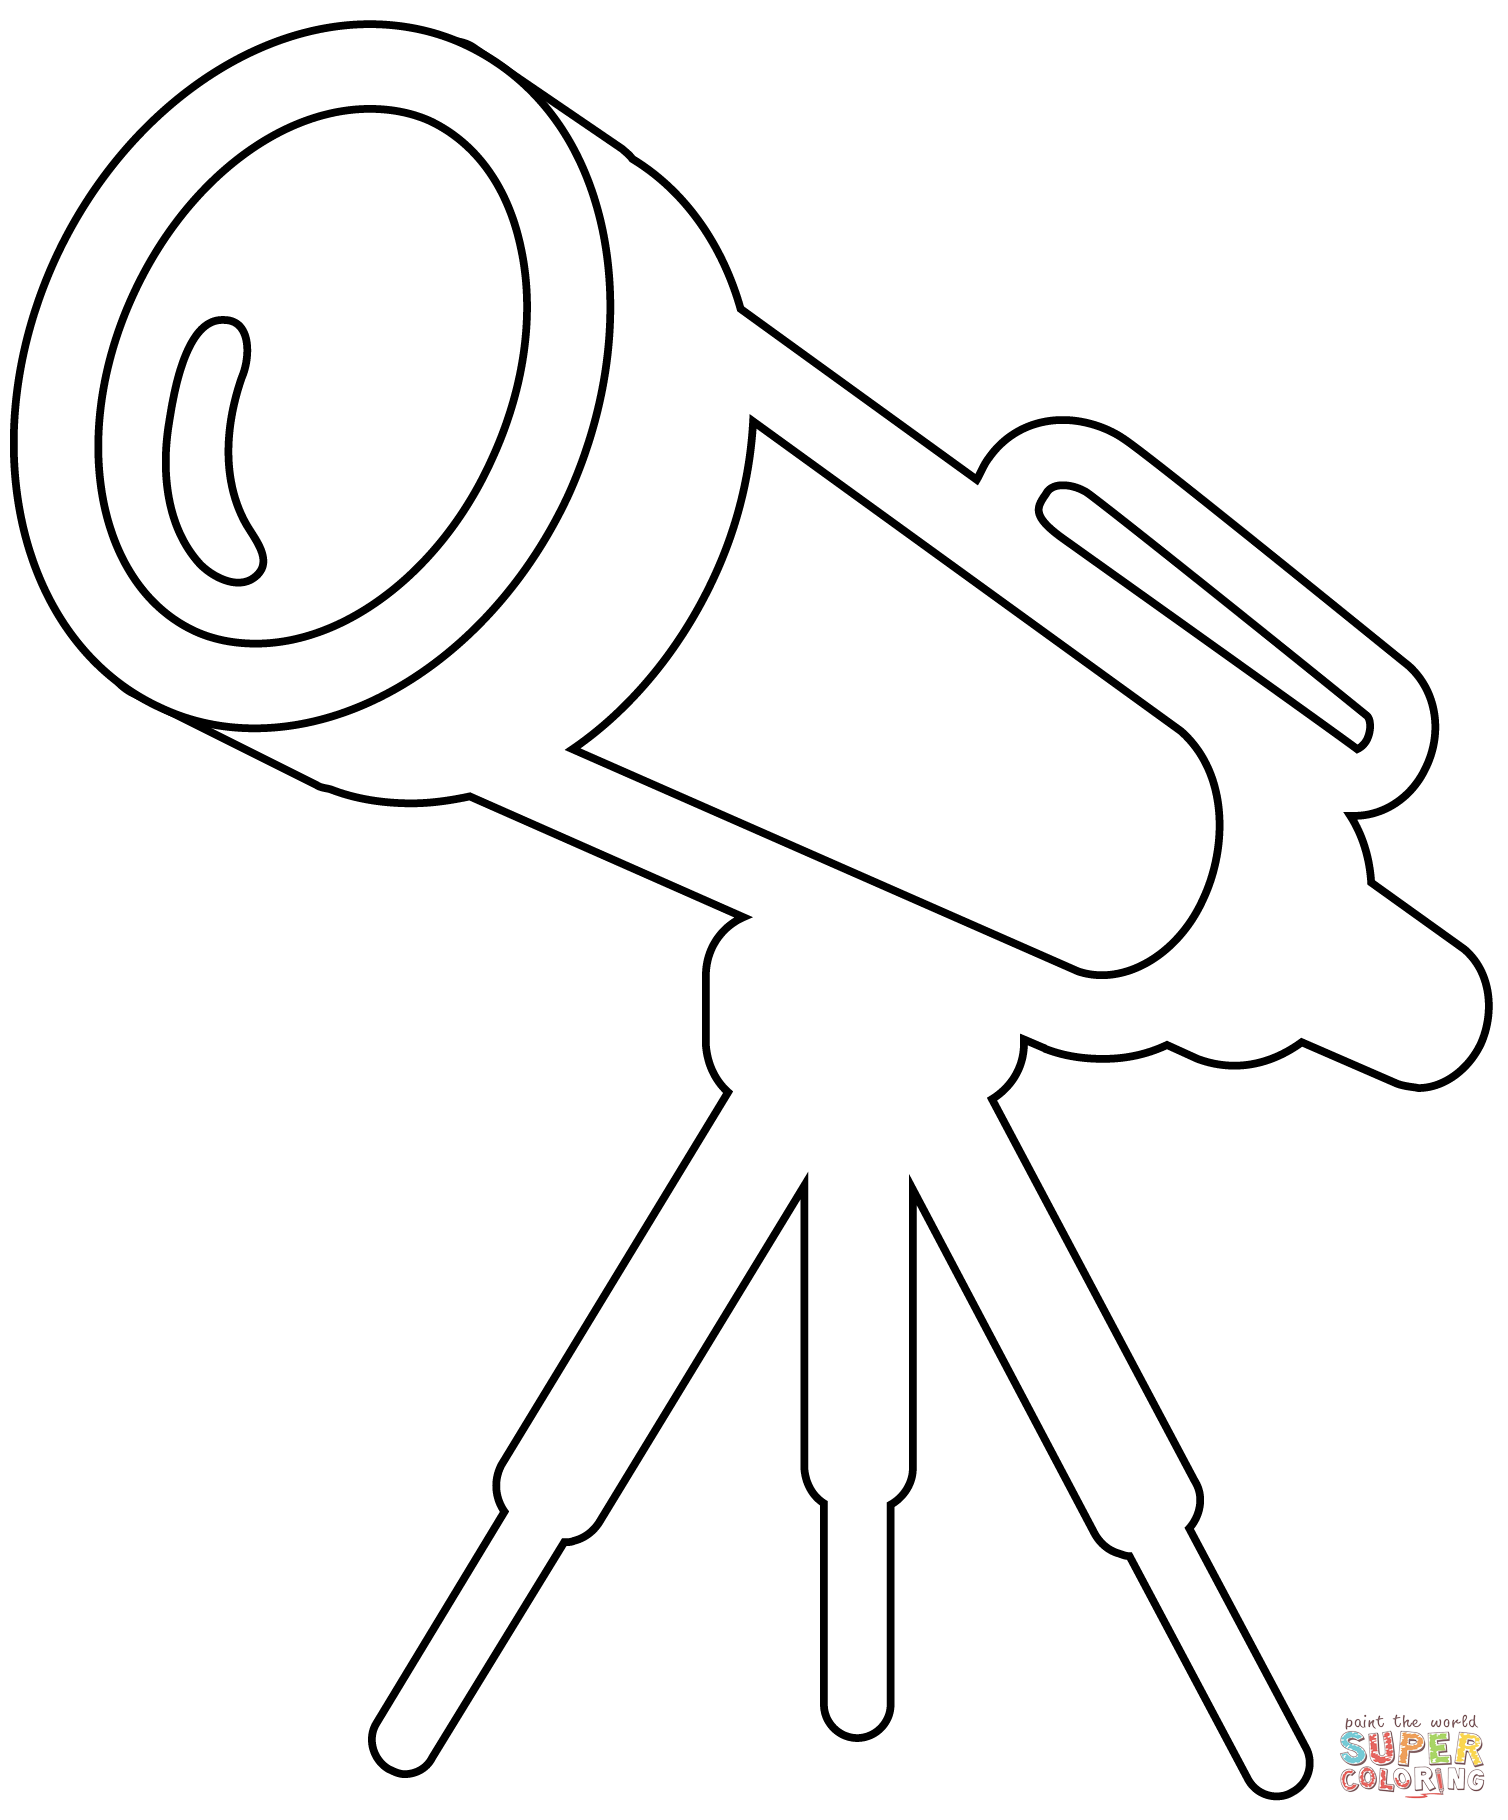 Telescope emoji coloring page free printable coloring pages